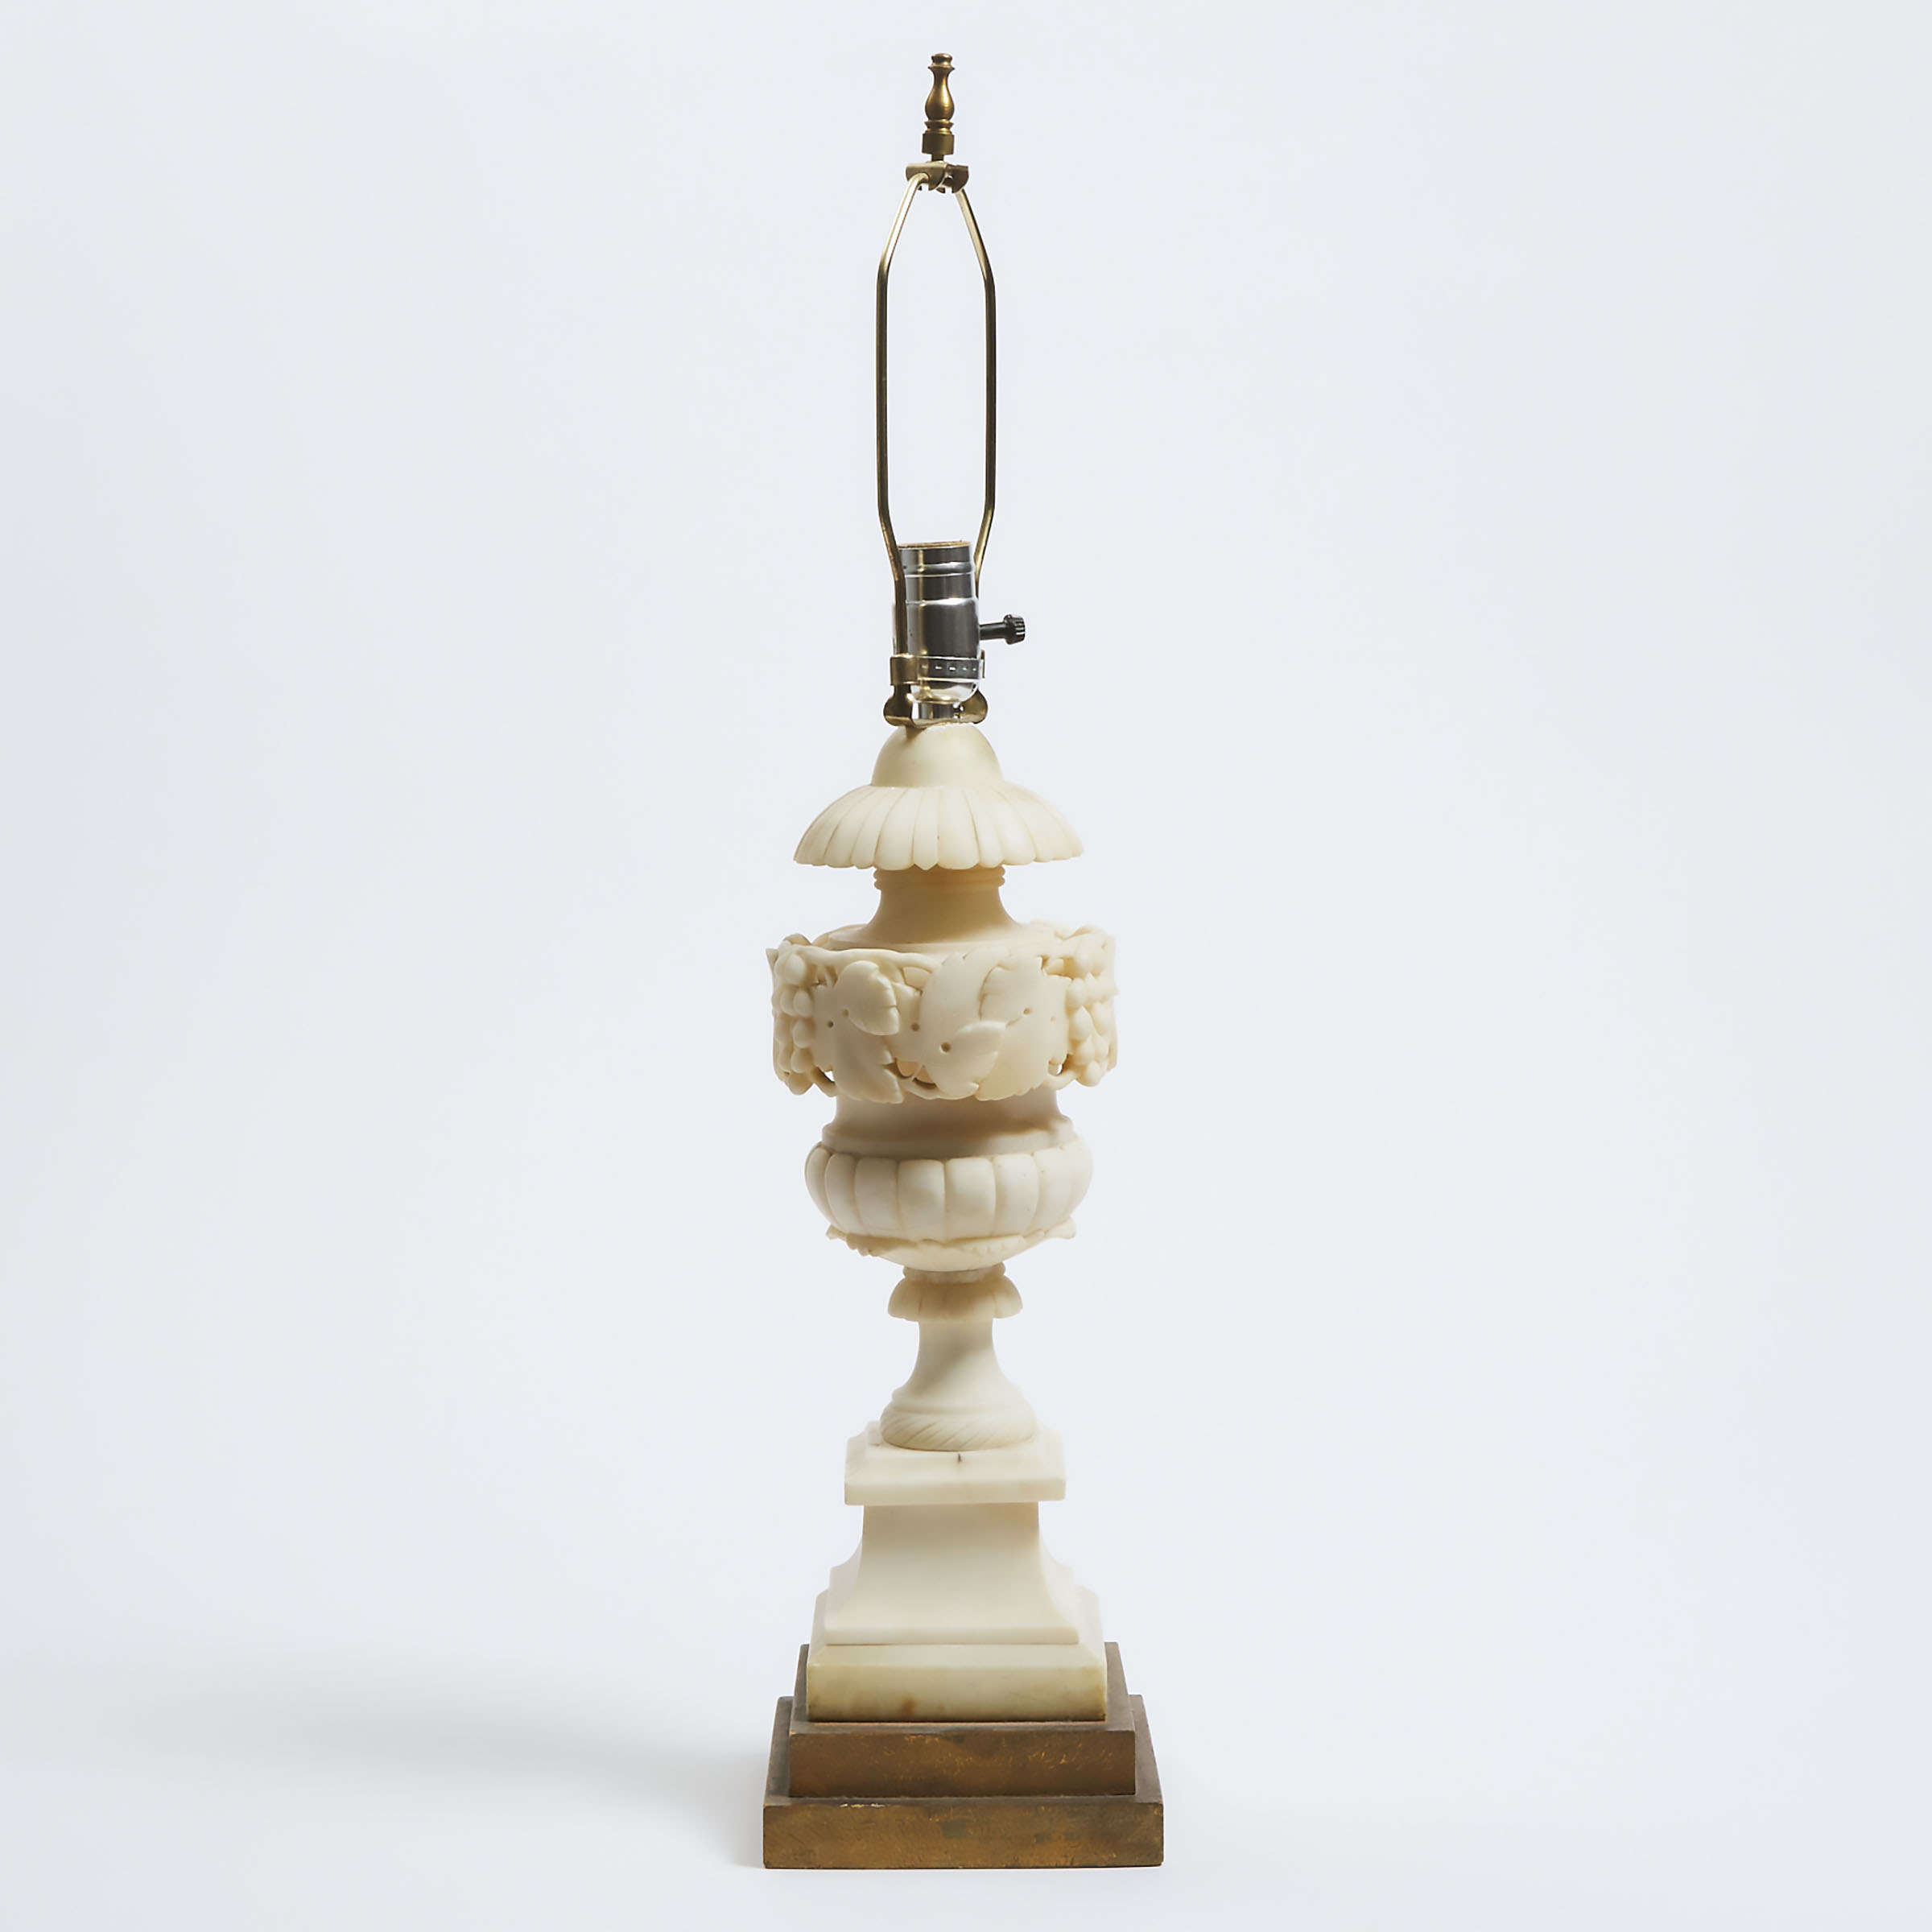 Italian Turned and Carved Alabaster Table Lamp, early-mid 20th century